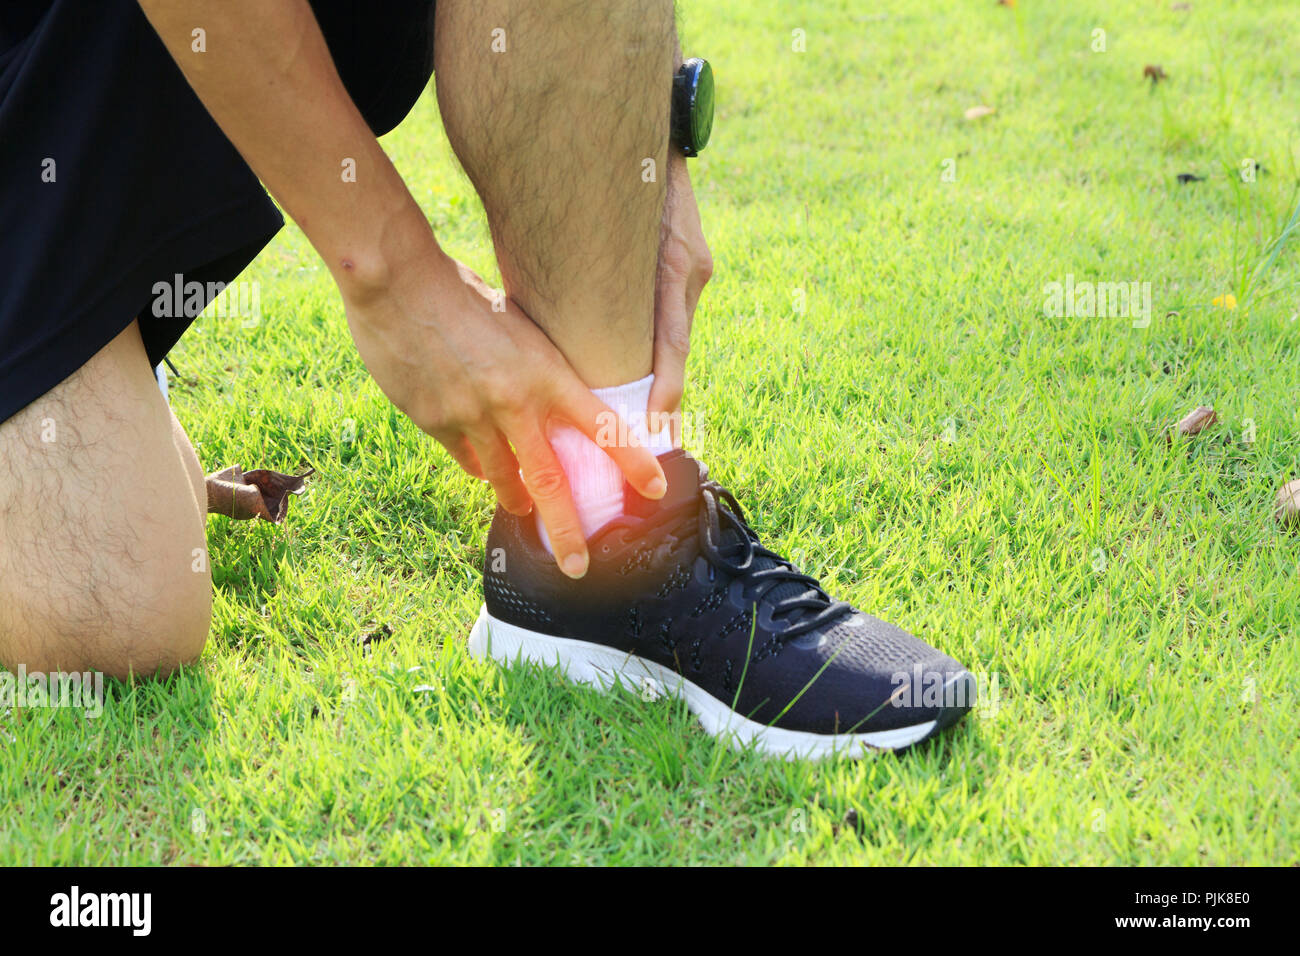 The man has hurt at the ankle / ankle hurt Stock Photo